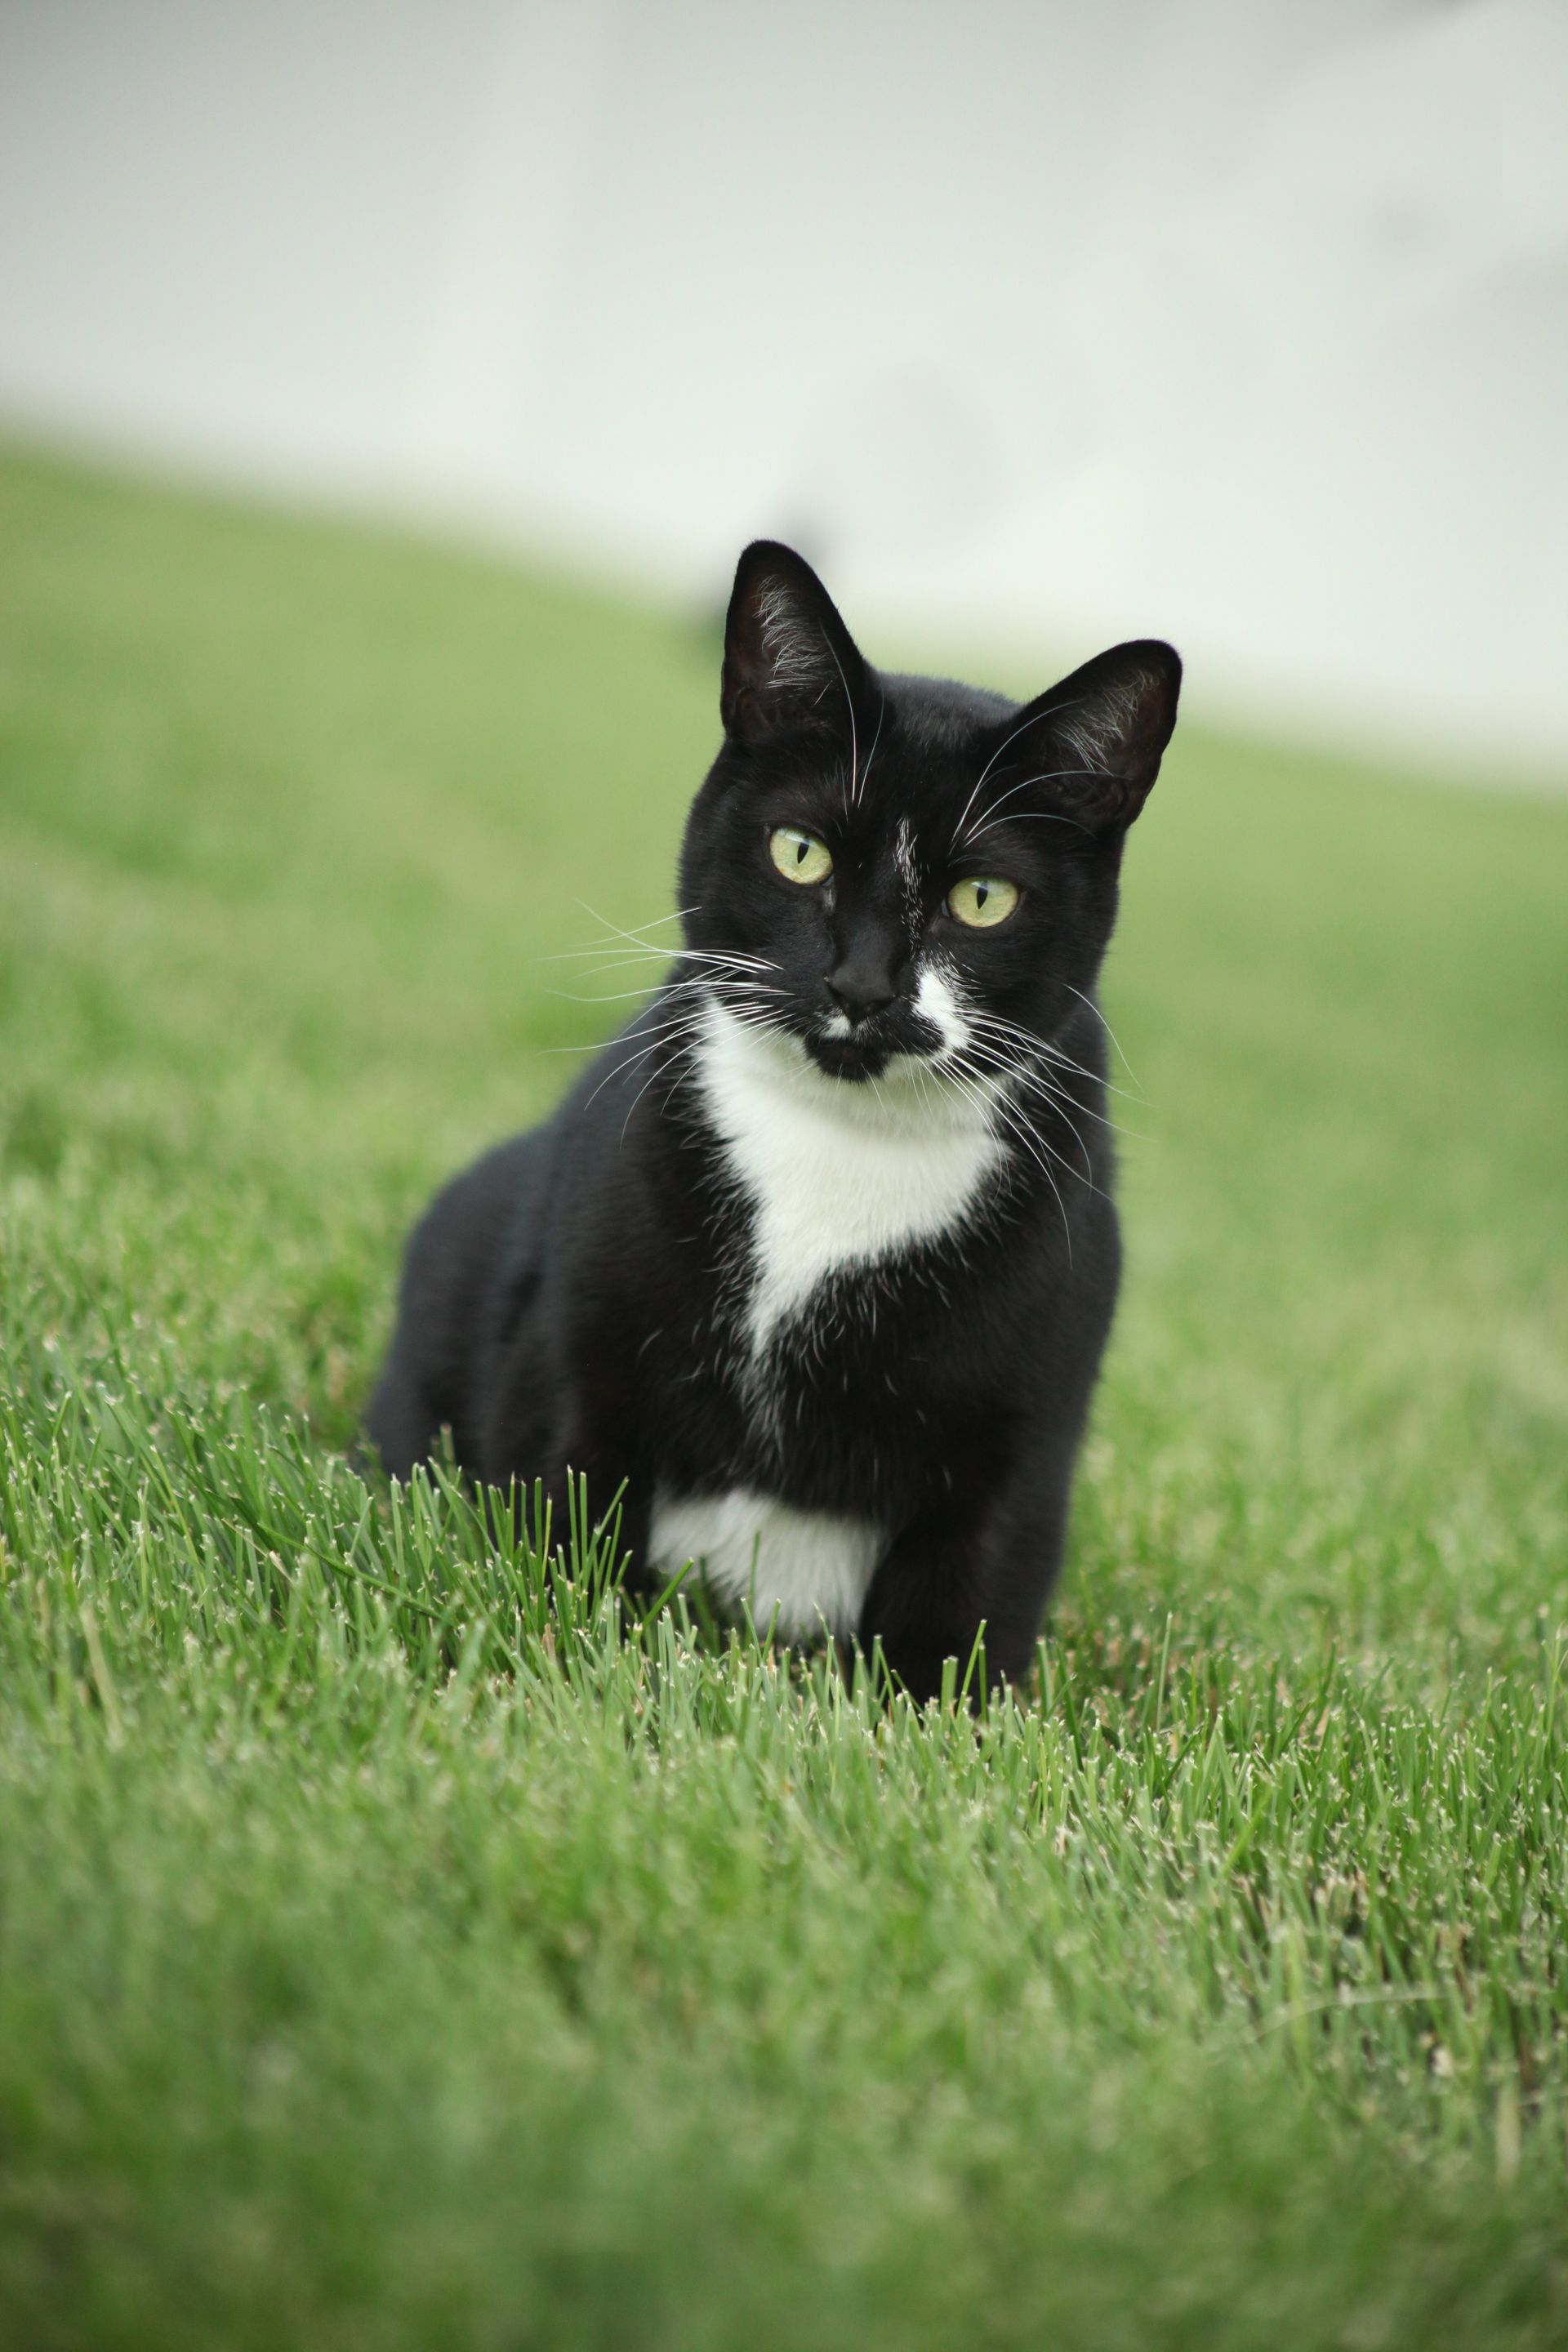 A small black cat sits on the grass.